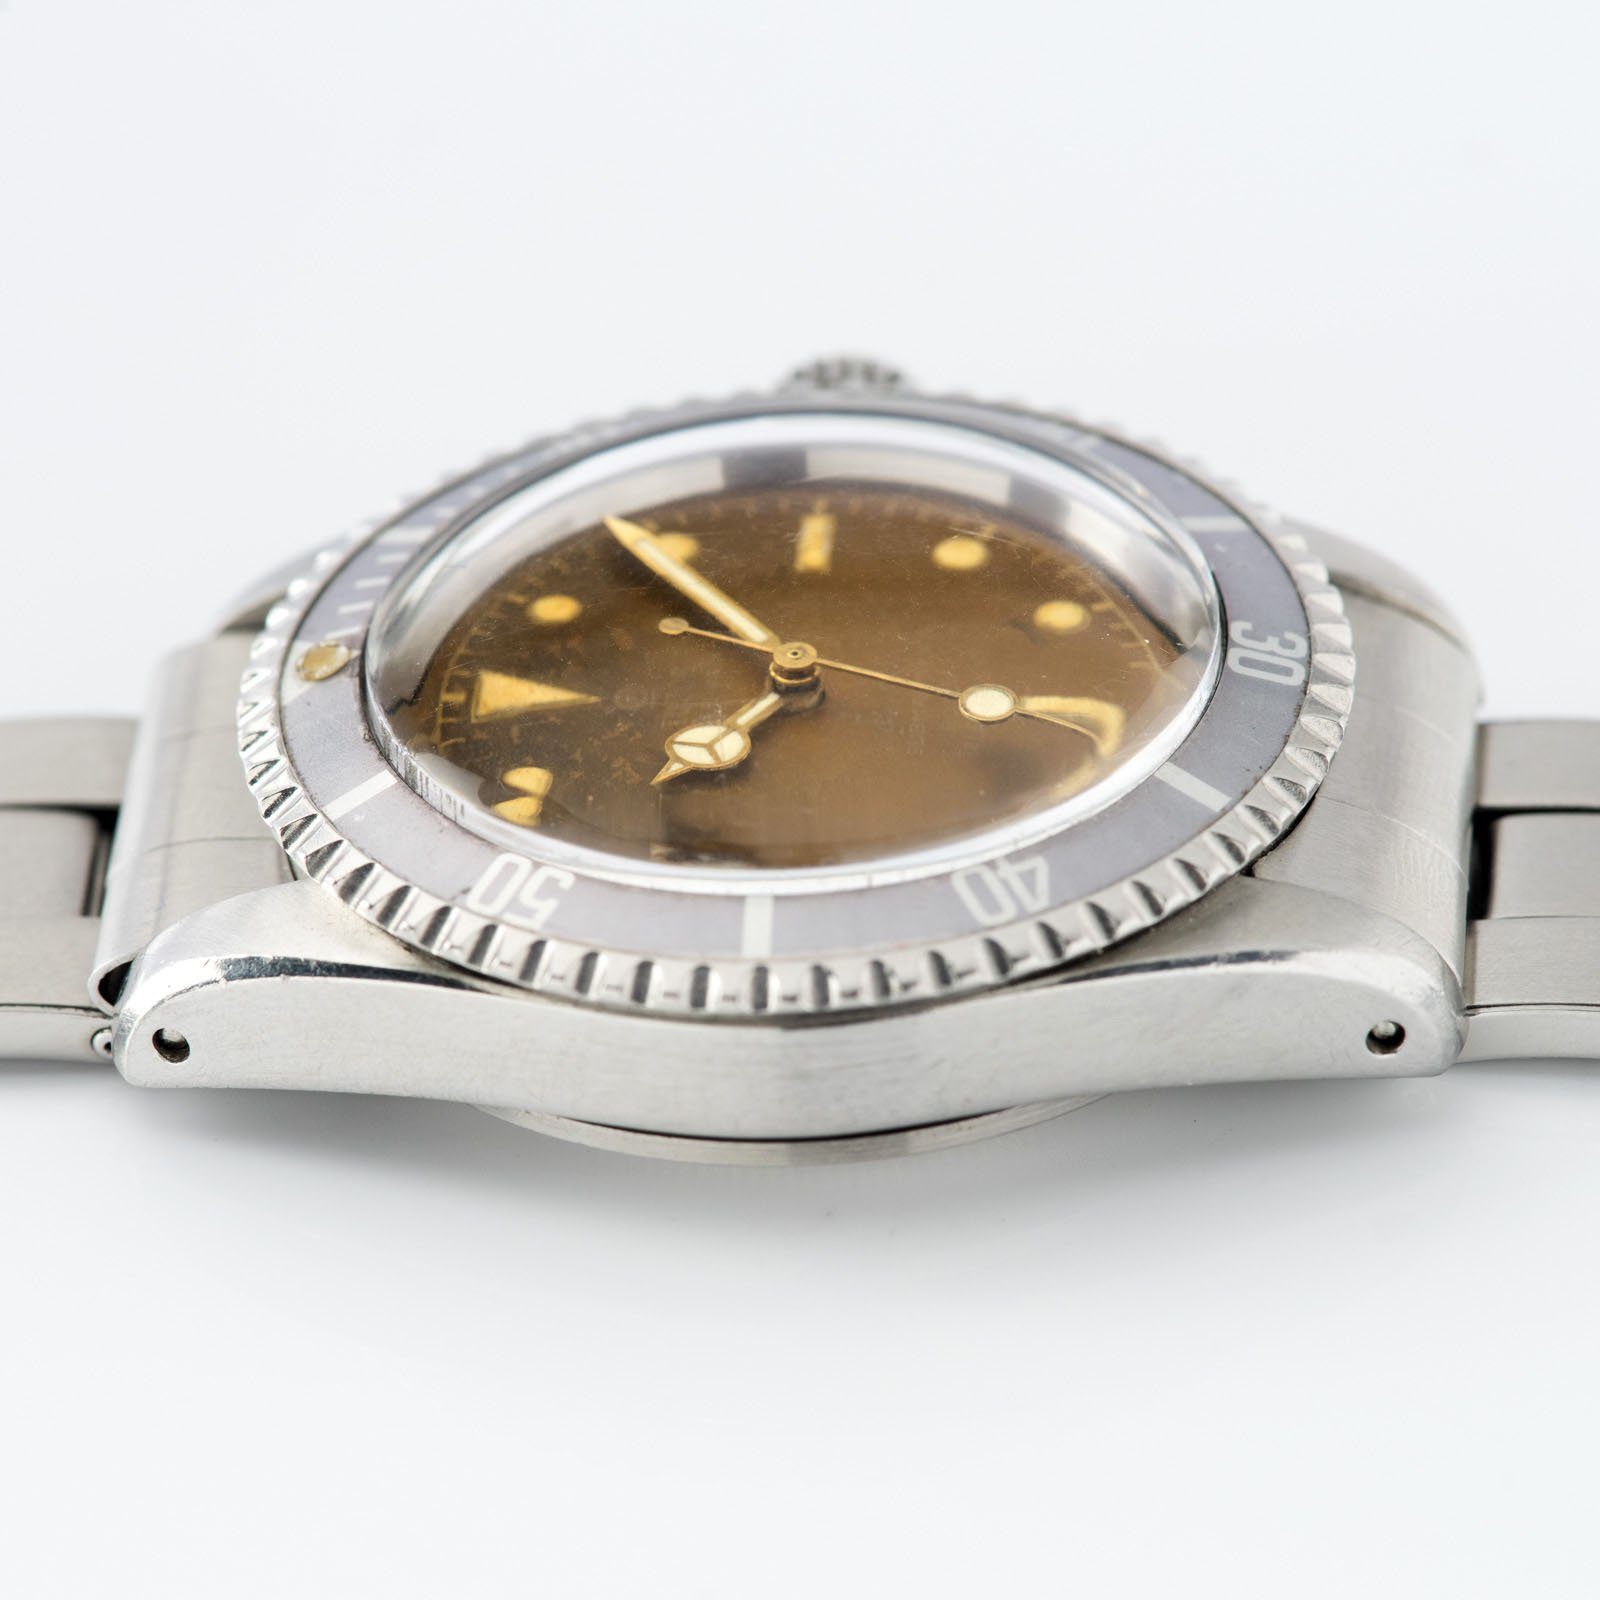 Tudor Submariner Ref 7928 with Incredible Tropical Dial